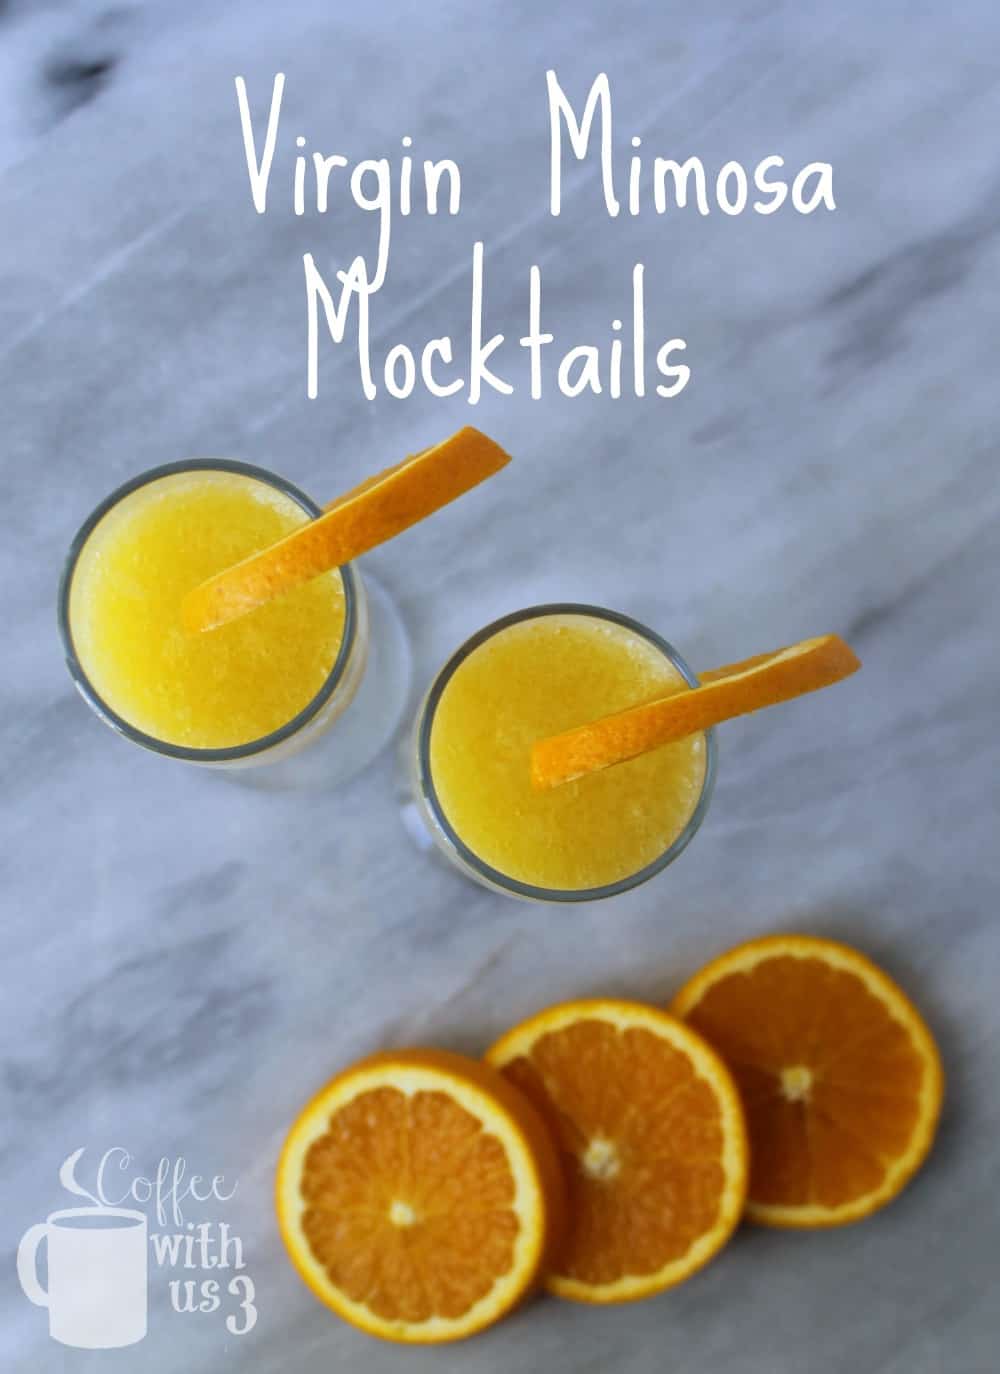 Sweet and fruity Virgin Mimosa Mocktails are a fun, kid-friendly fancy drink that's perfect for a party!